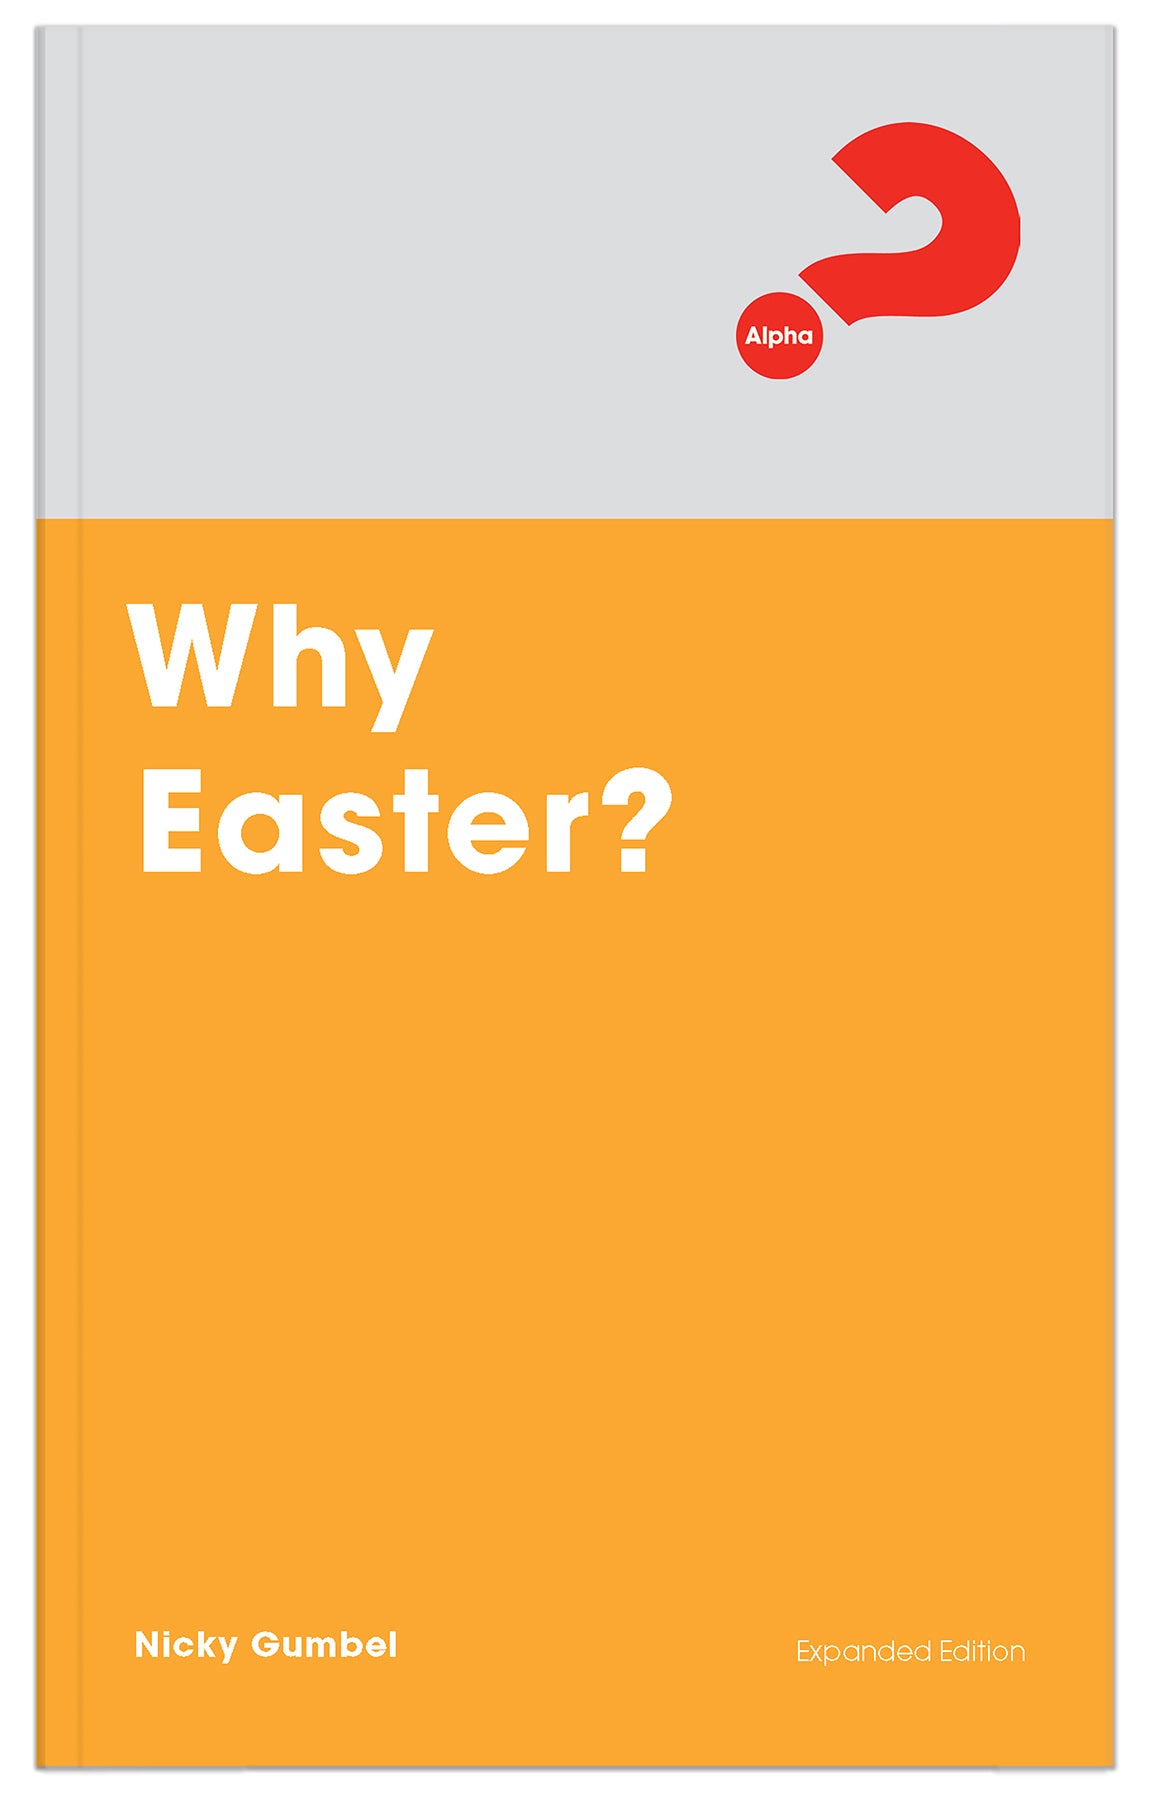 Image of Why Easter Expanded Edition other